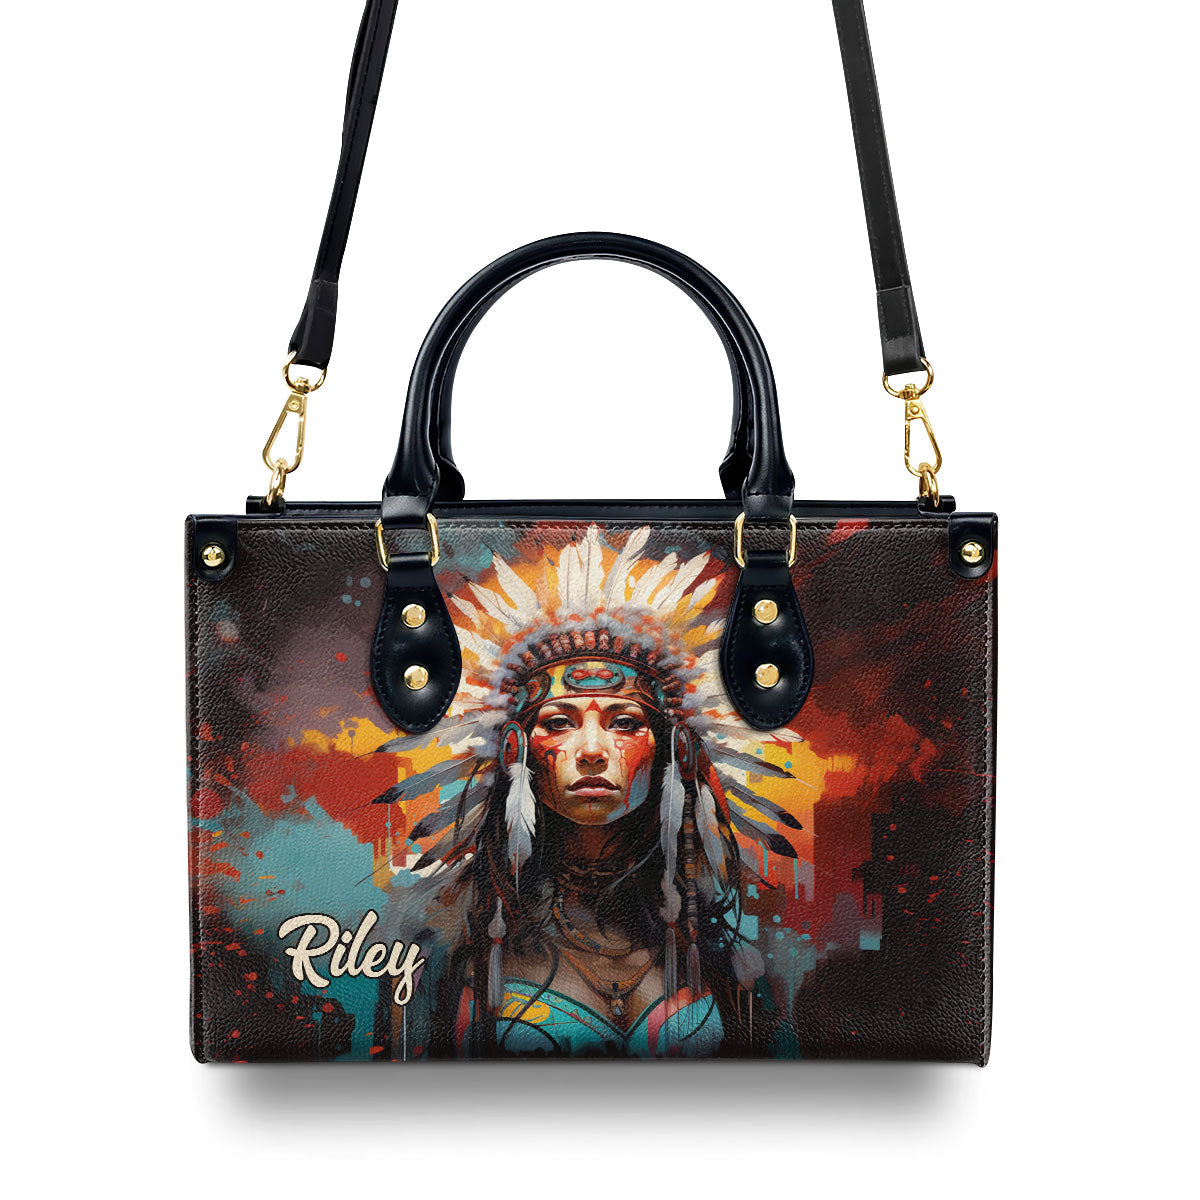 Native American Woman - Personalized Leather Handbag MS116